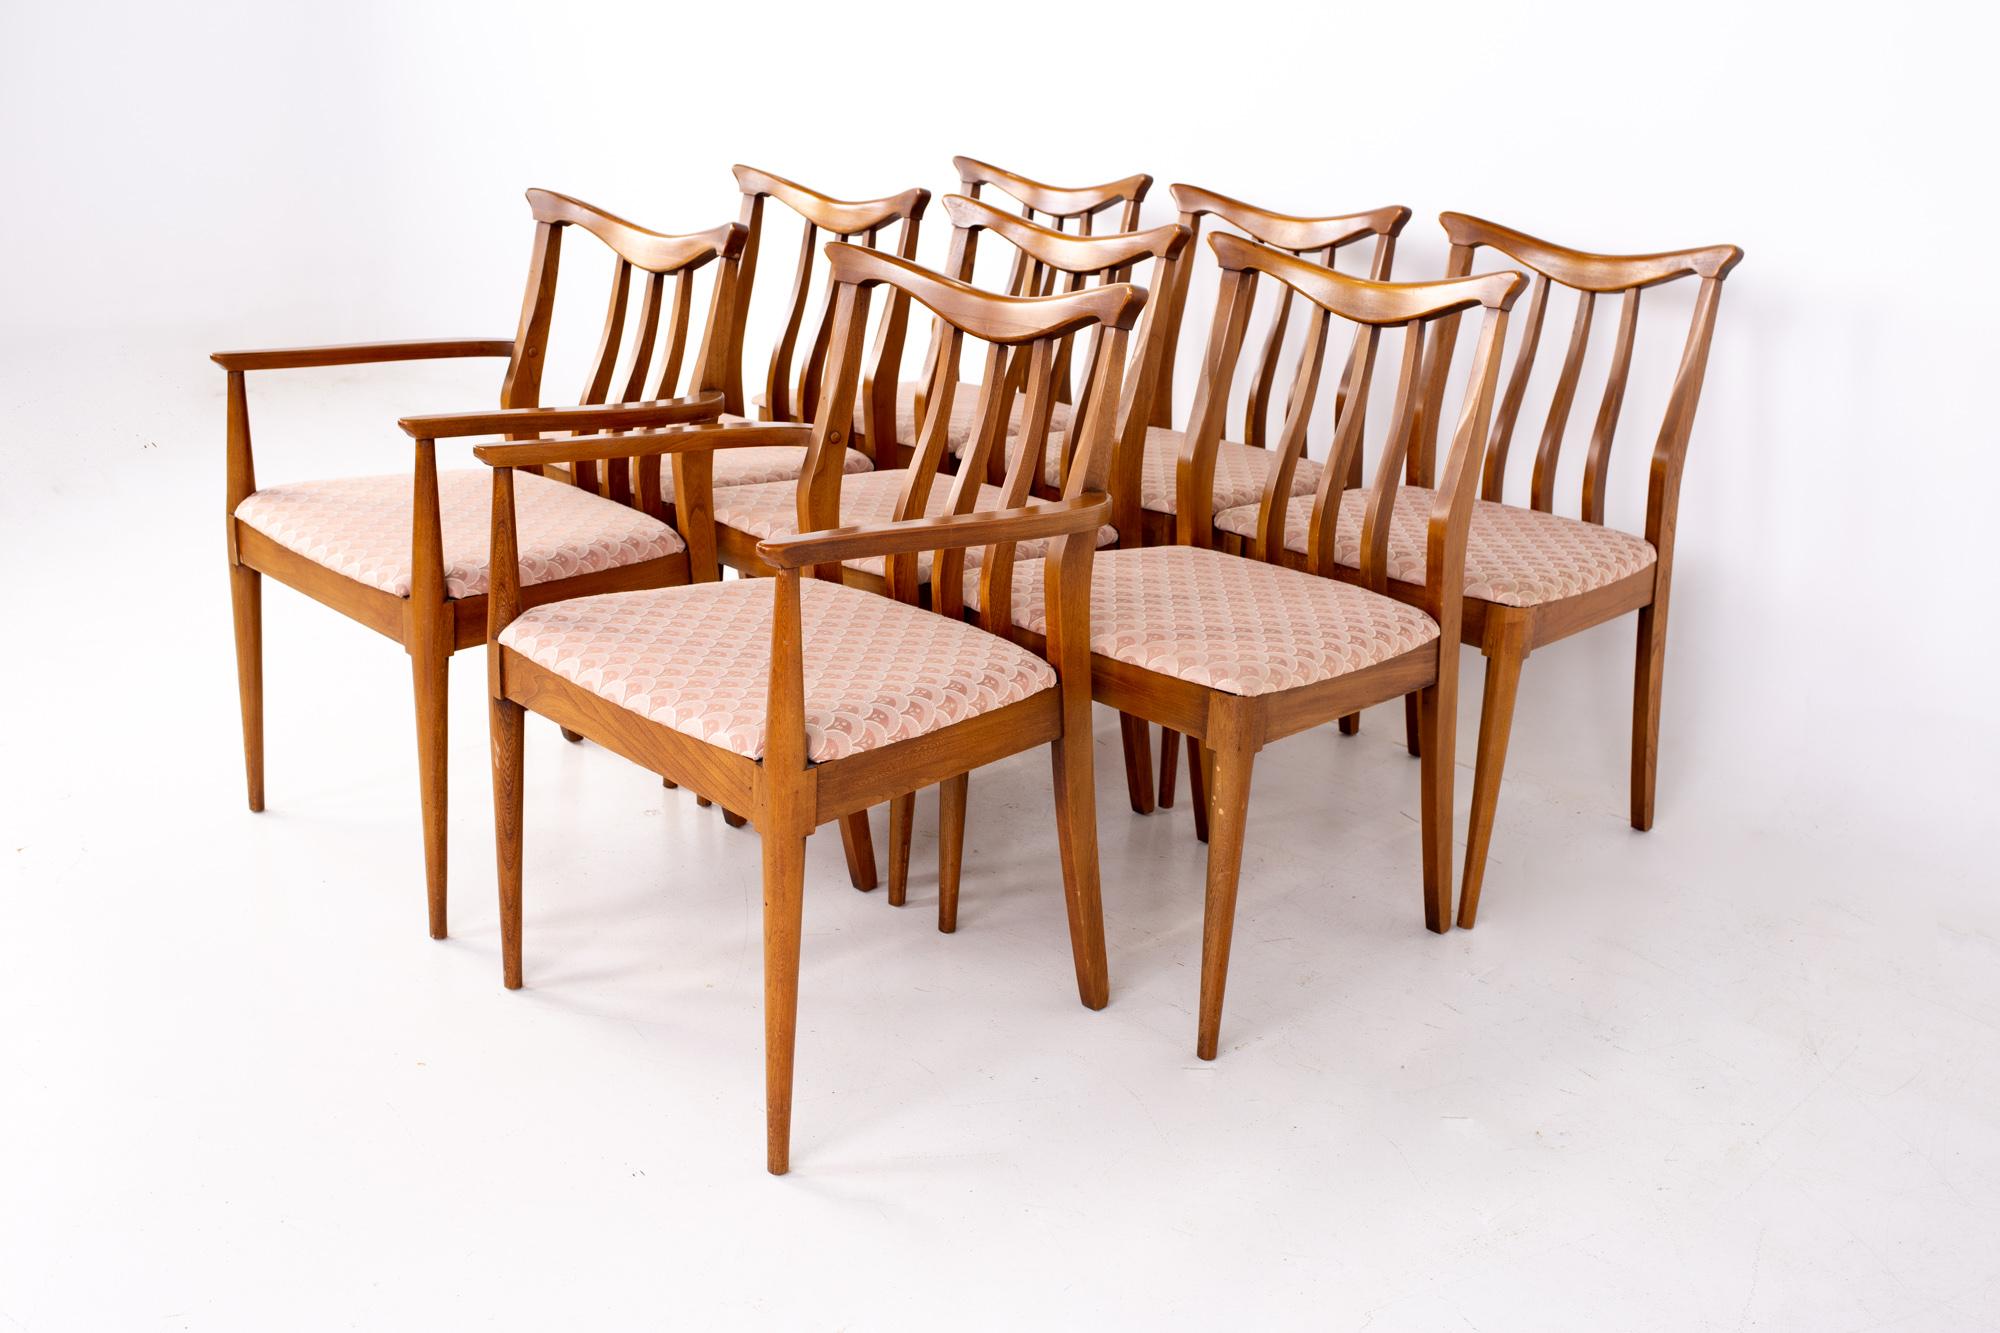 Blowing Rock mid century walnut dining chairs - Set of 8
Each chair measures: 23.75 wide x 20 deep x 33.5 high, with a seat height of 18.5 inches

All pieces of furniture can be had in what we call restored vintage condition. That means the piece